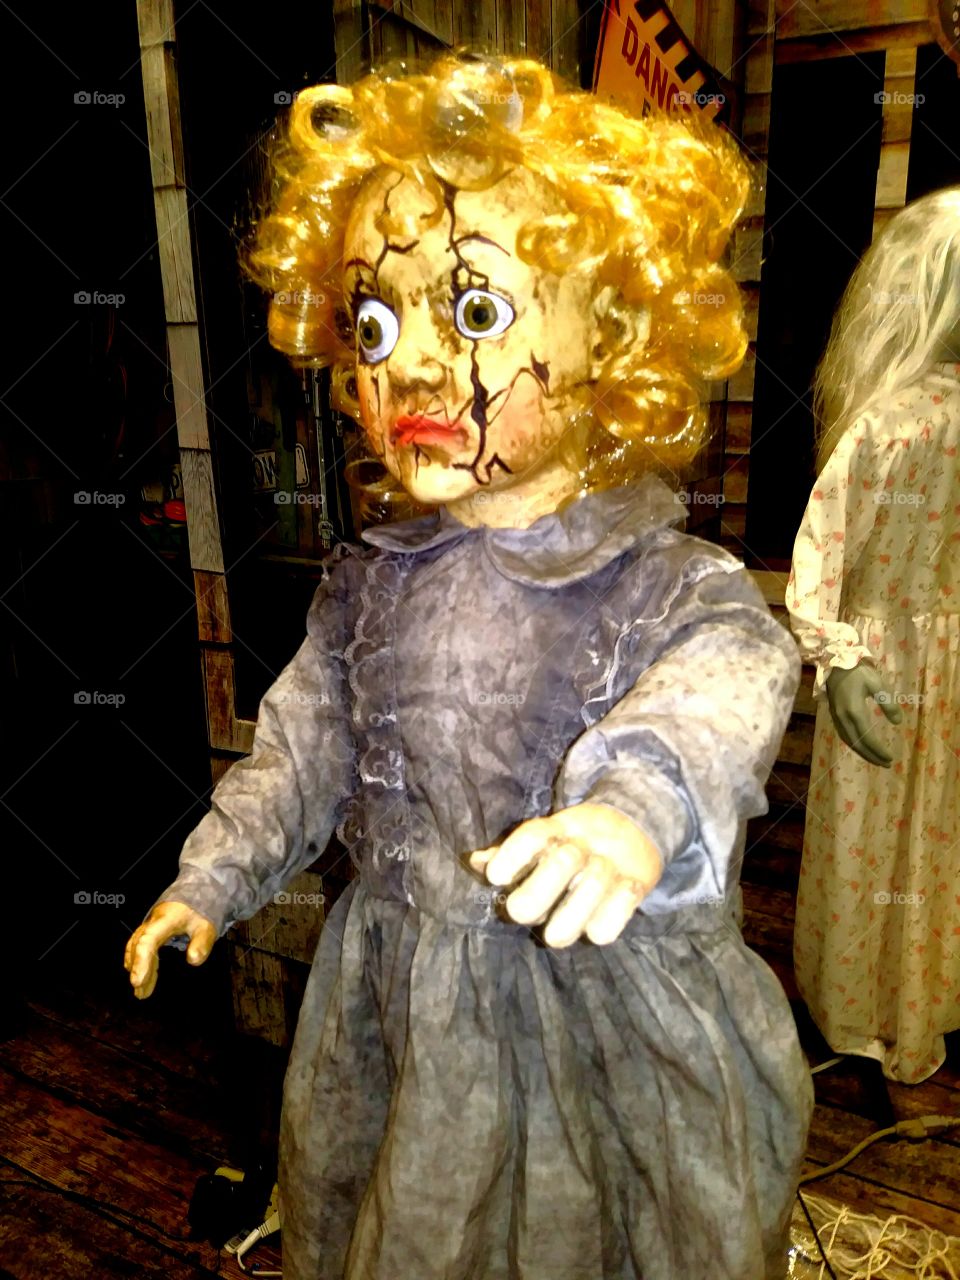 all cracked up doll